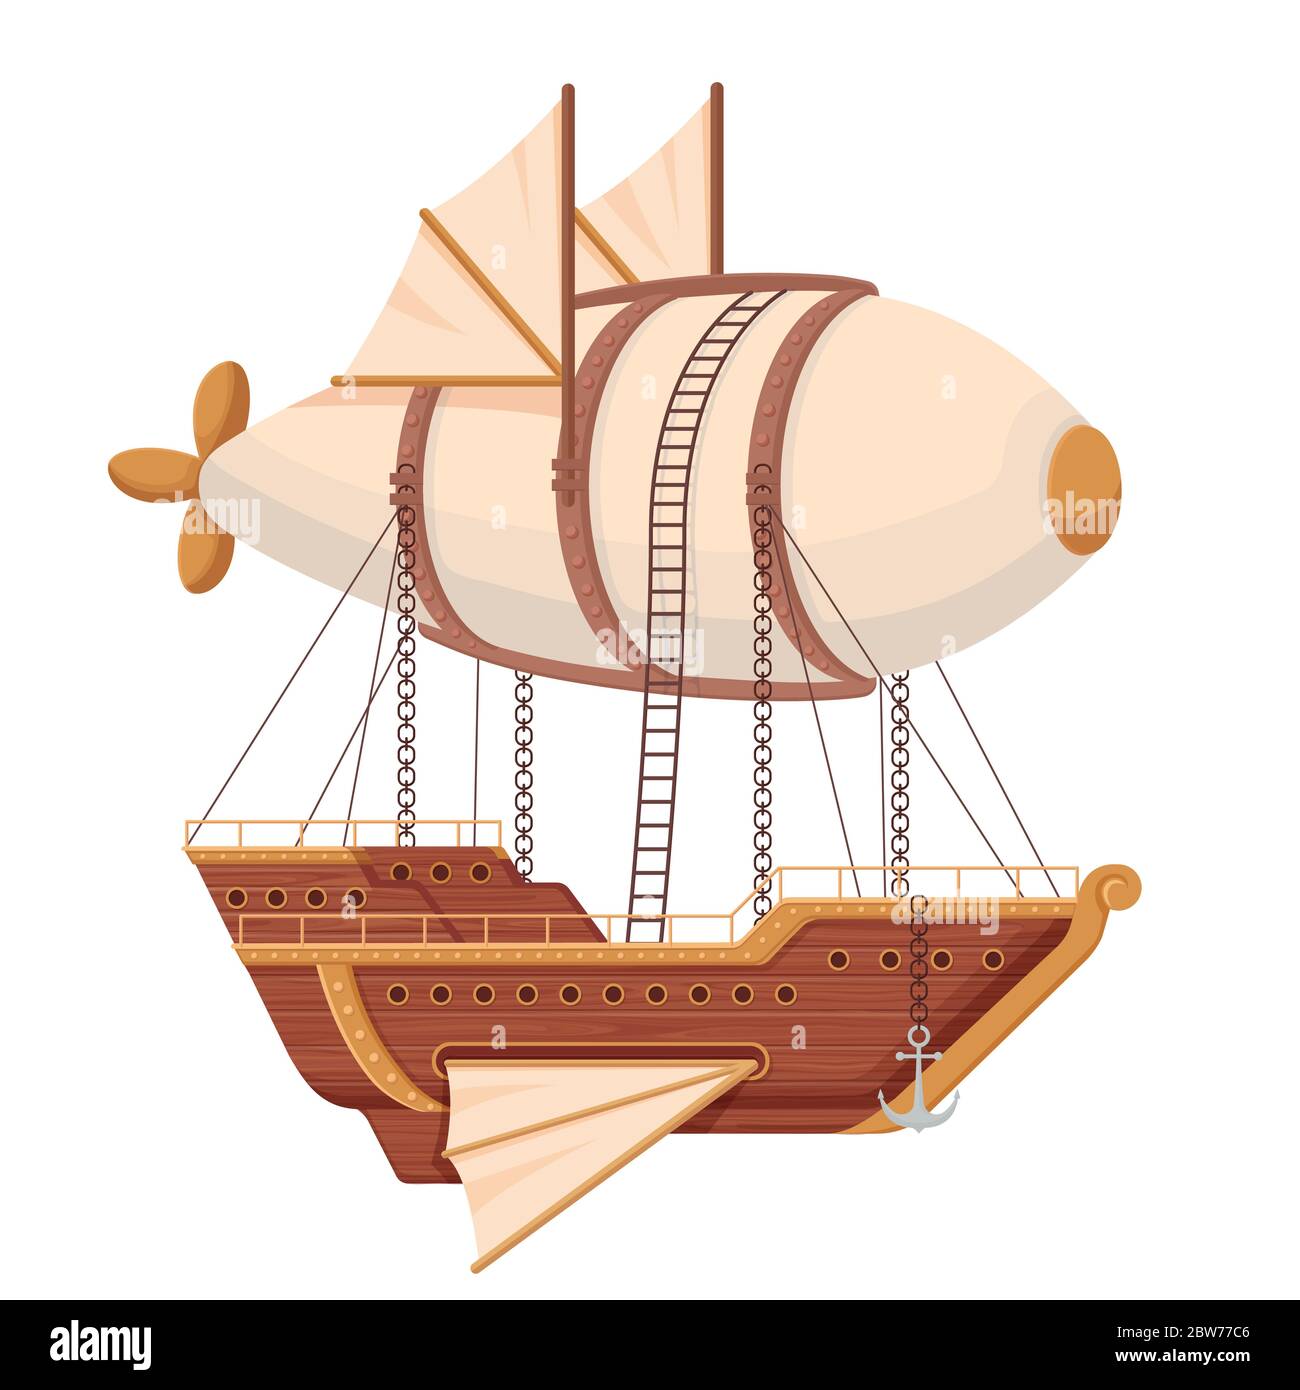 Flying ship airship. Futuristic ship with wings and balloon in technopunk style. Stock Vector